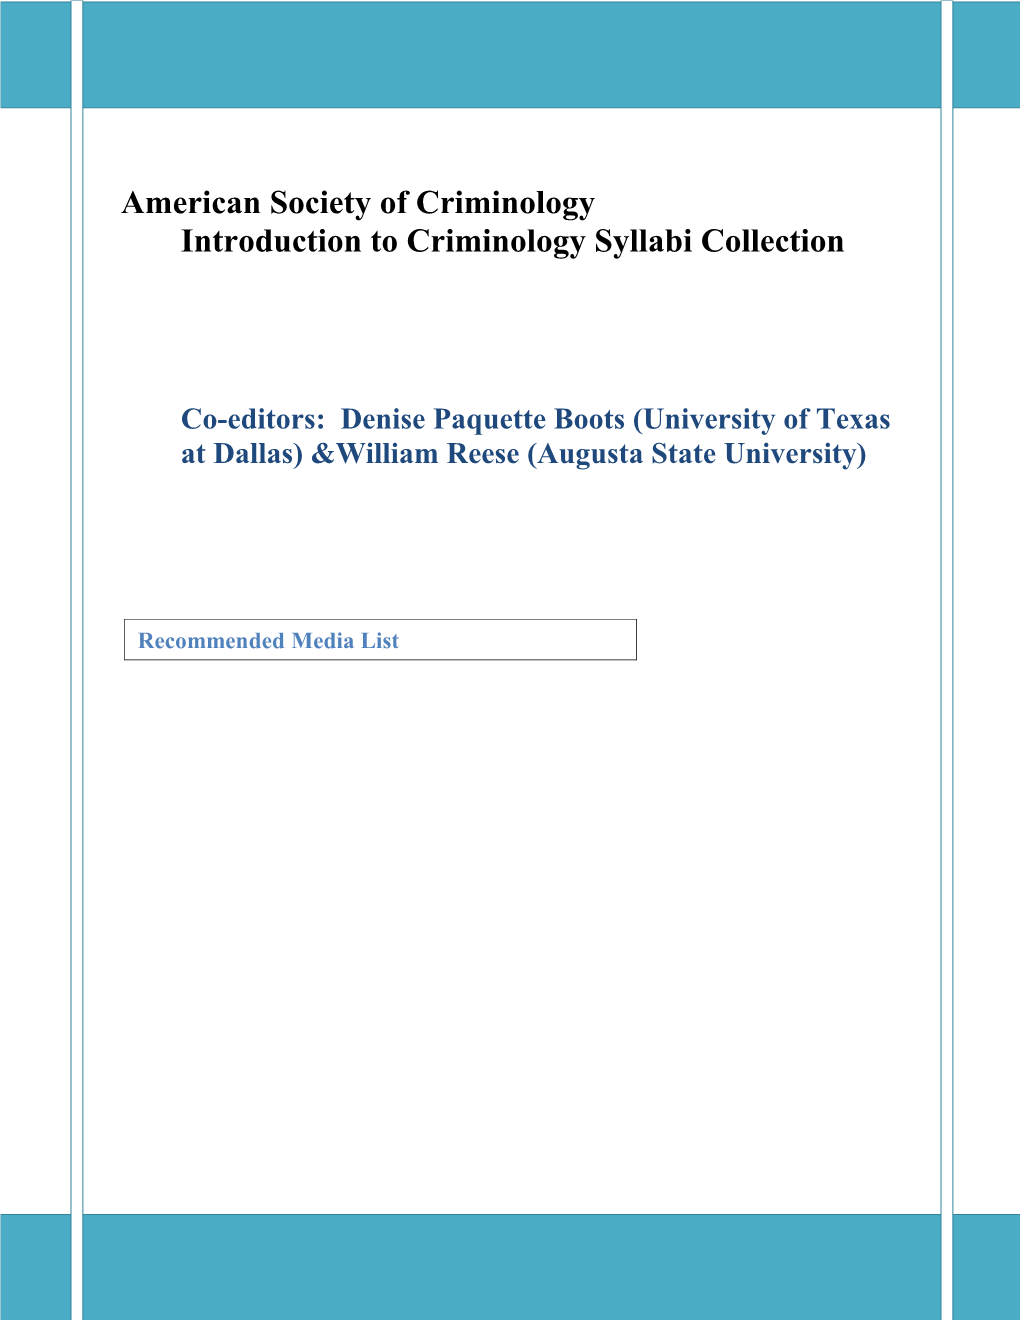 American Society of Criminology Introduction to Criminology Syllabi Collection